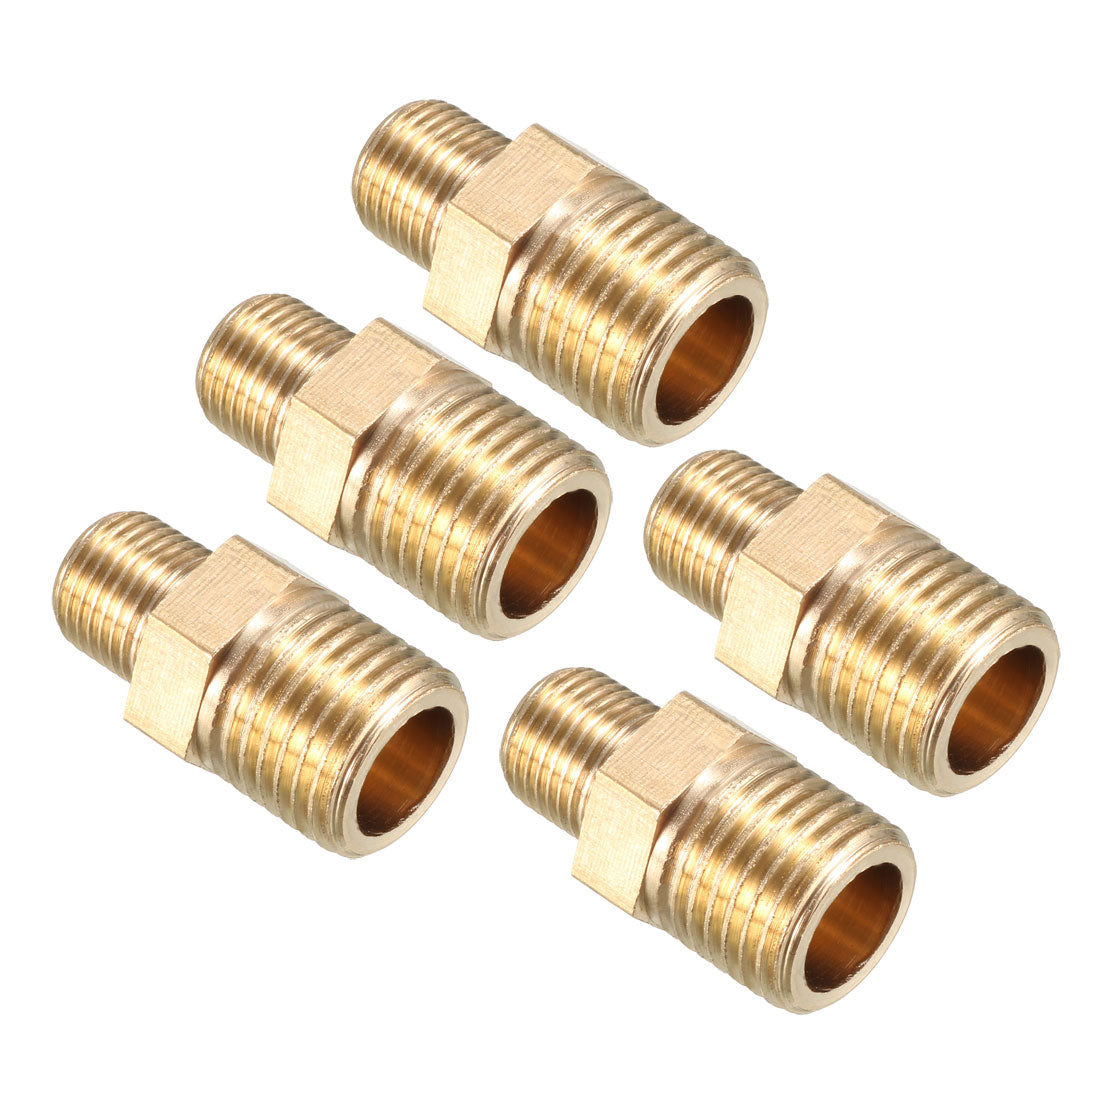 uxcell Uxcell Brass Pipe Fitting Reducing Hex Bushing 1/4 BSP Male x 1/8 BSP Male Adapter 5pcs